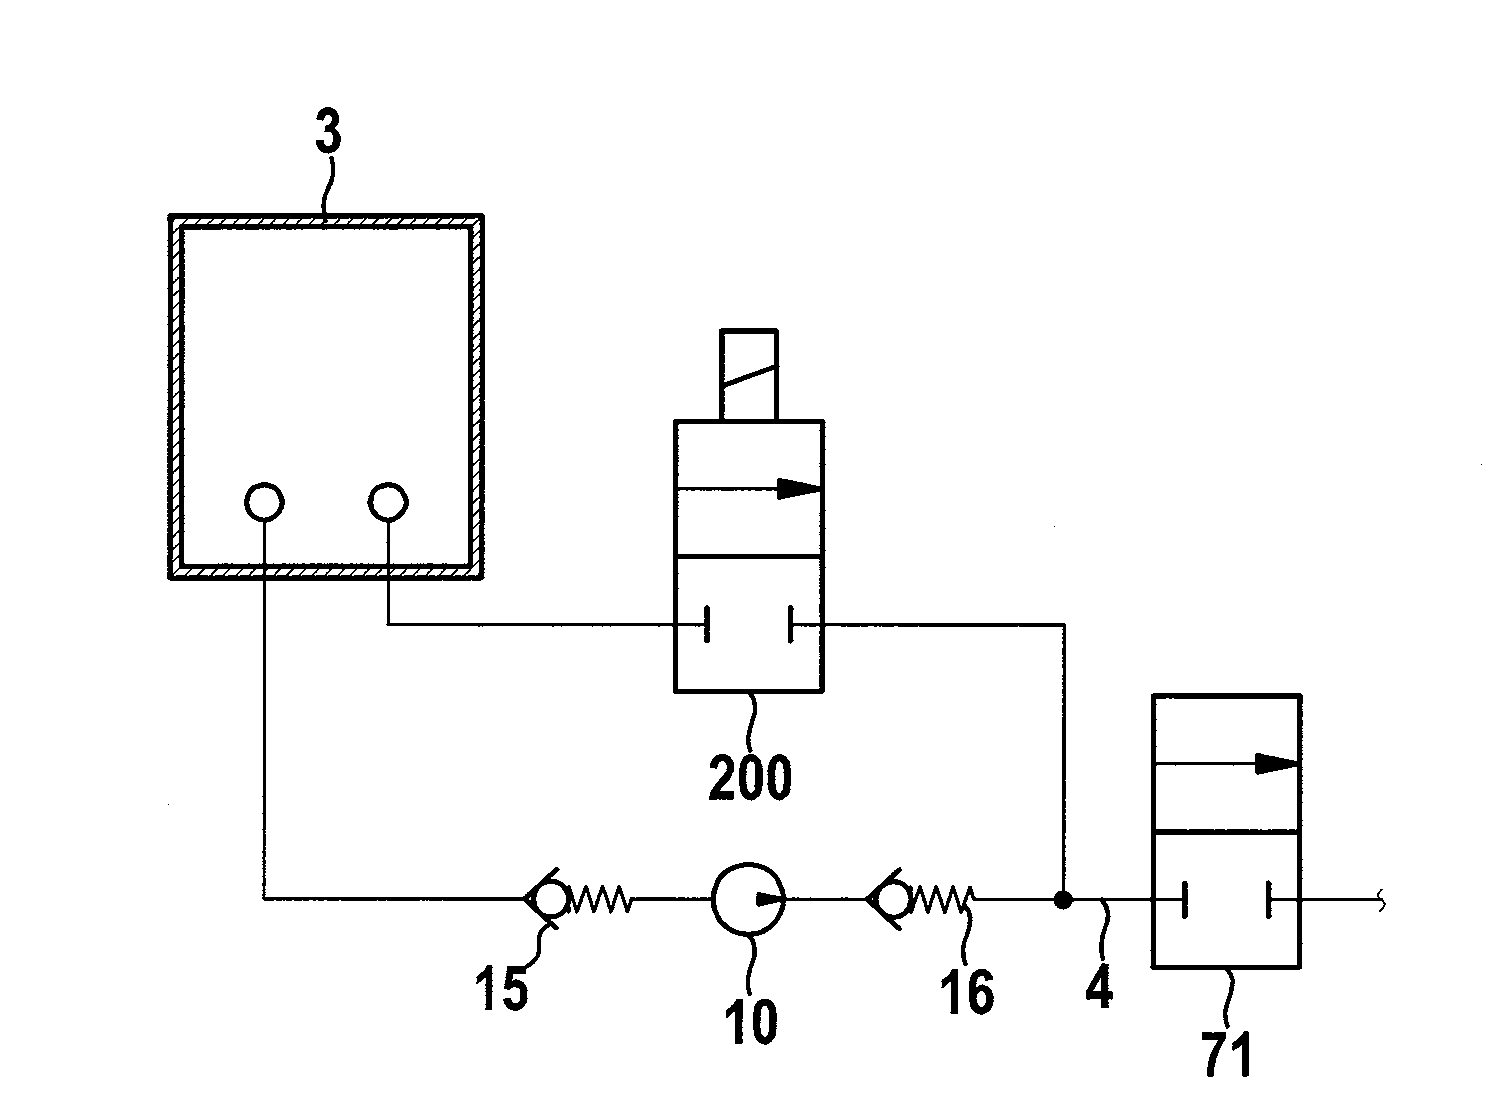 A method for operating a conveying and proportioning system